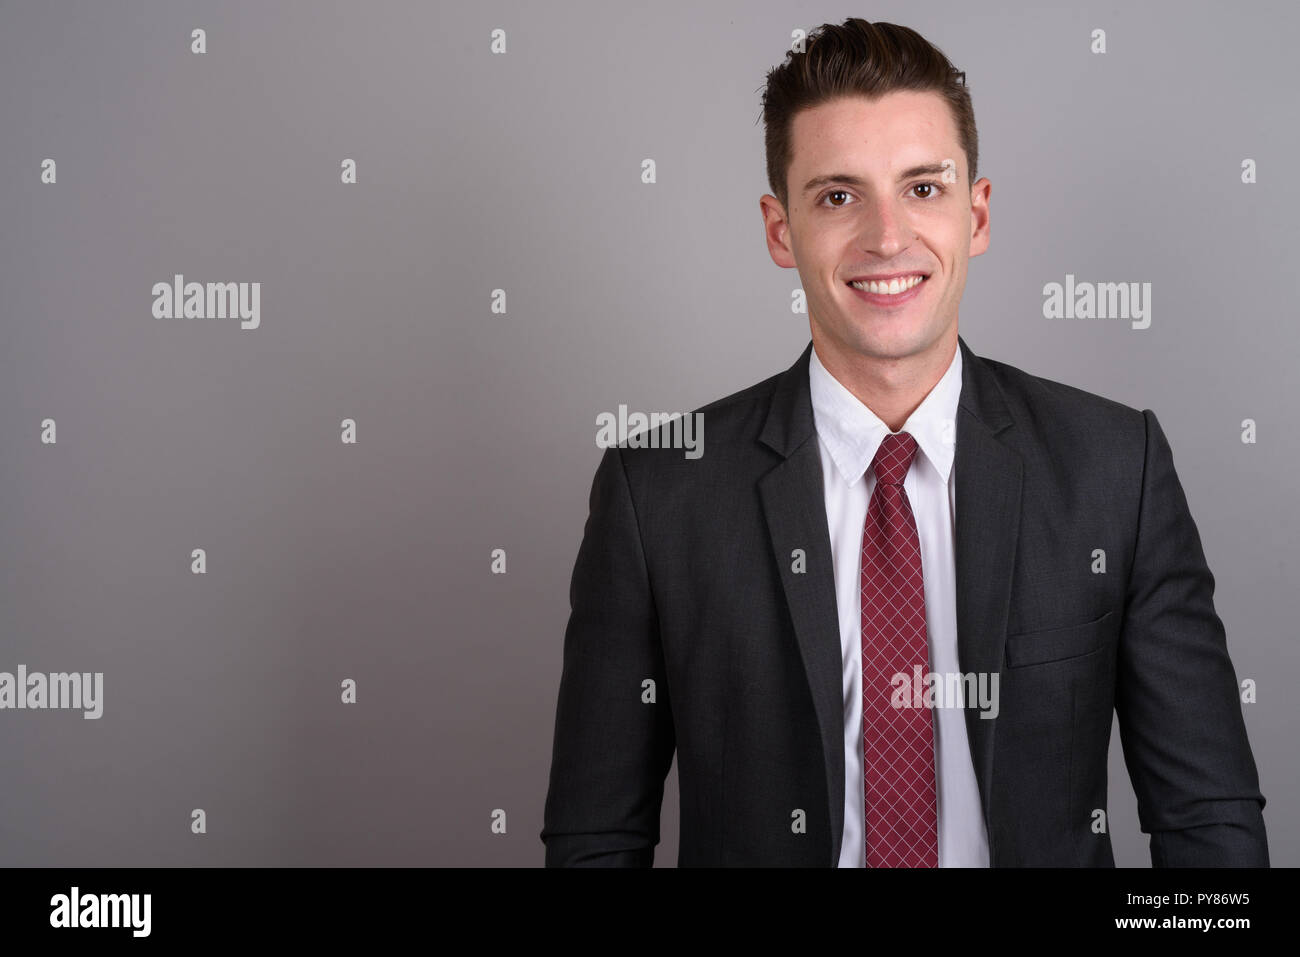 Young happy businessman wearing suit against gray background Stock Photo